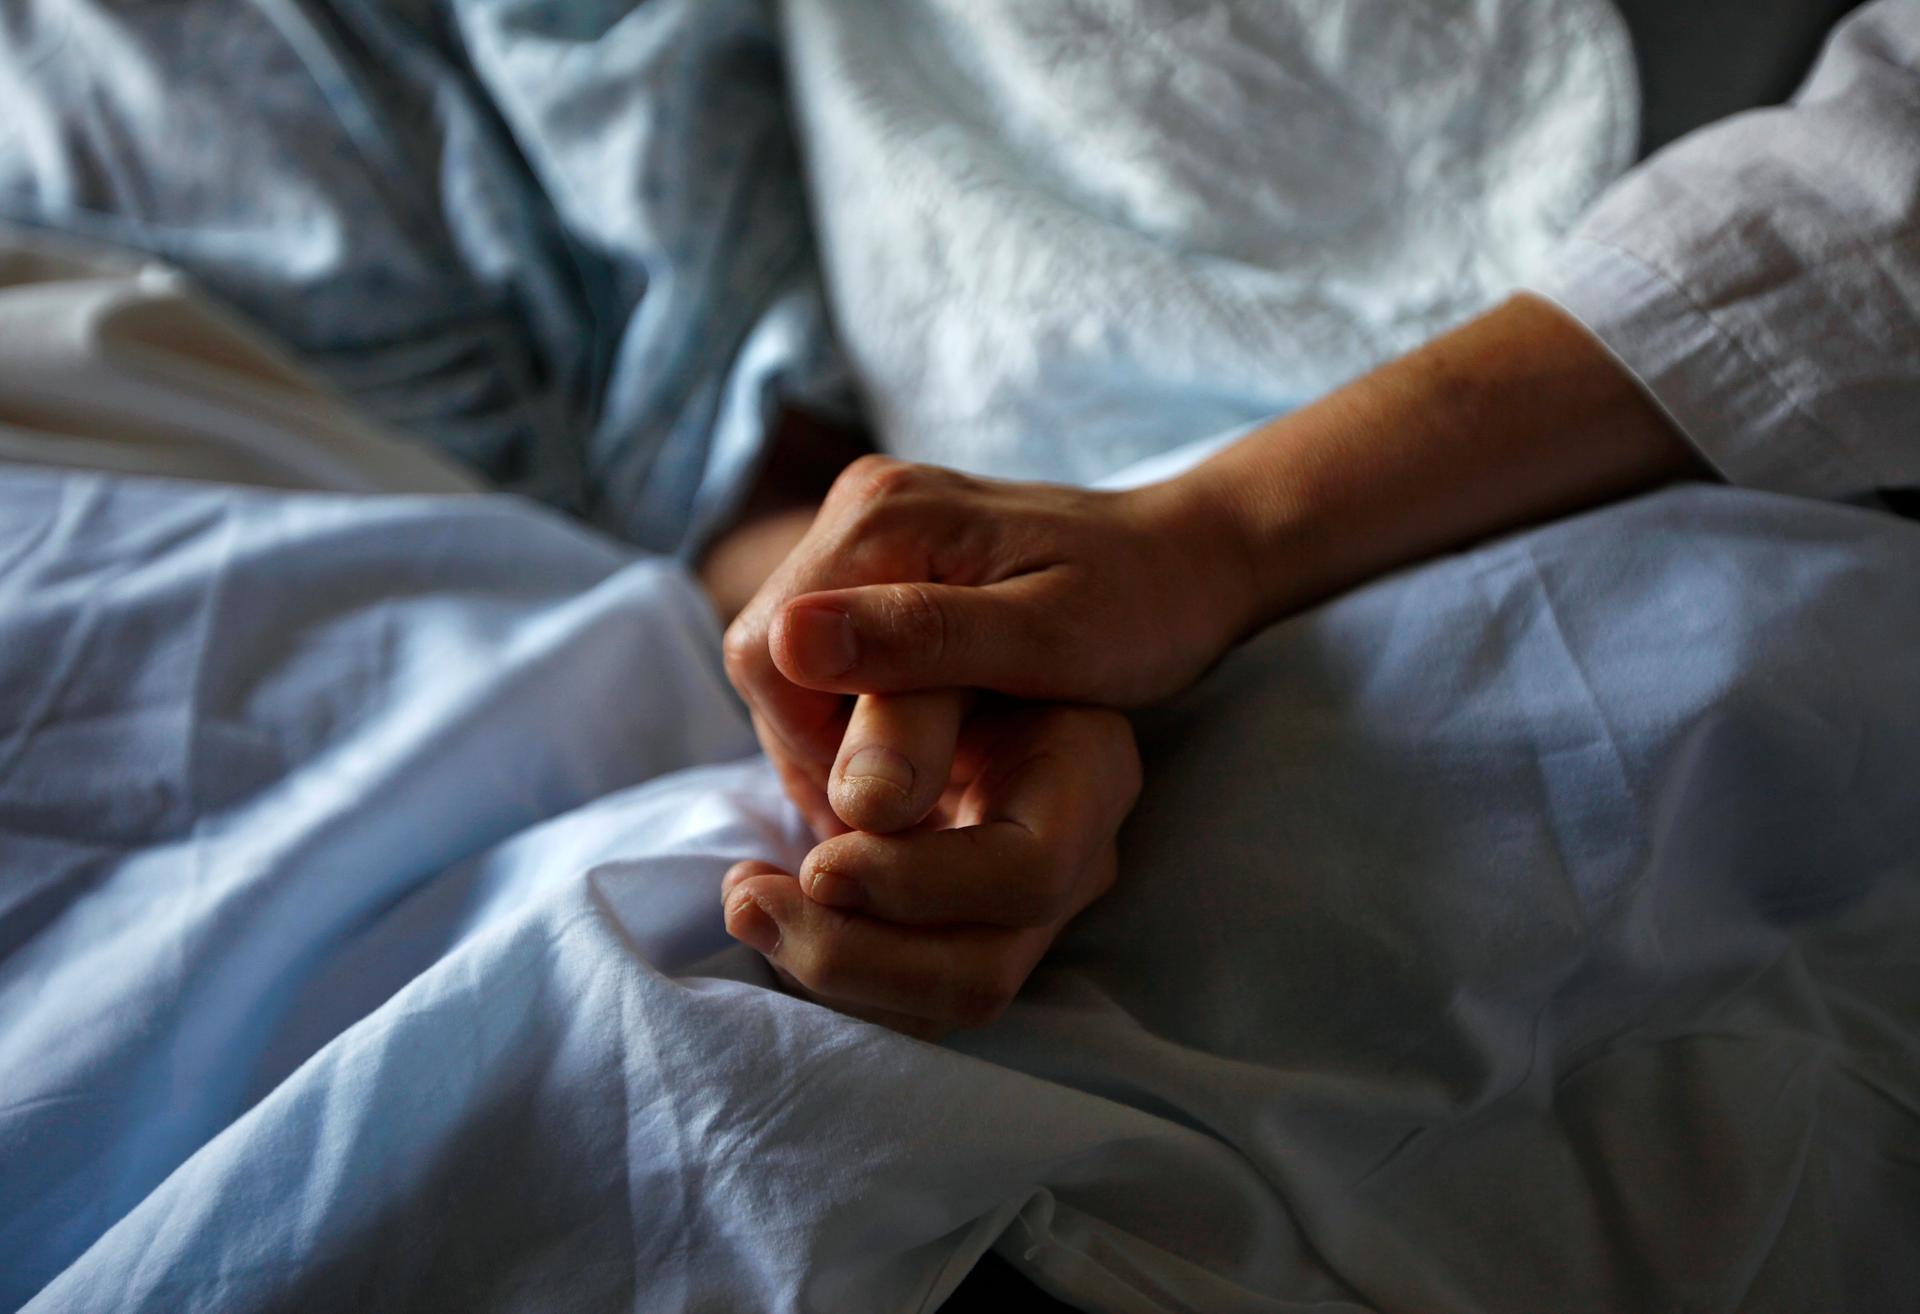 A woman holds the hand of her mother who is dying from cancer during her final hours at a palliative care hospital in Winnipeg, Canada